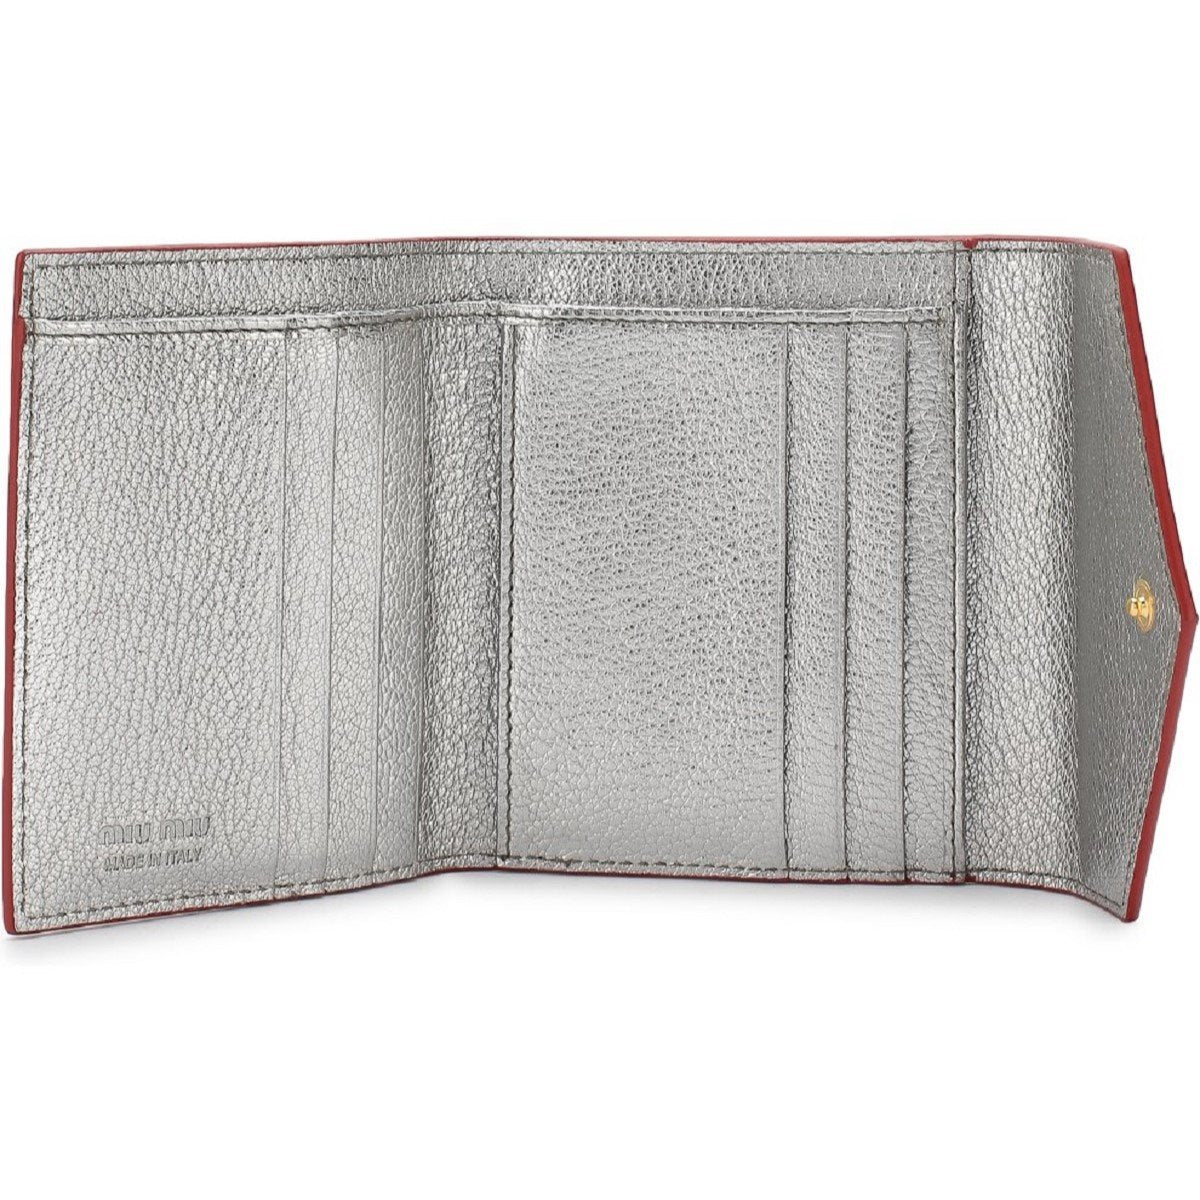 Miu Miu Silver Cromo Madras Forever Glitter Leather Heart Love Wallet 5MH014 at_Queen_Bee_of_Beverly_Hills